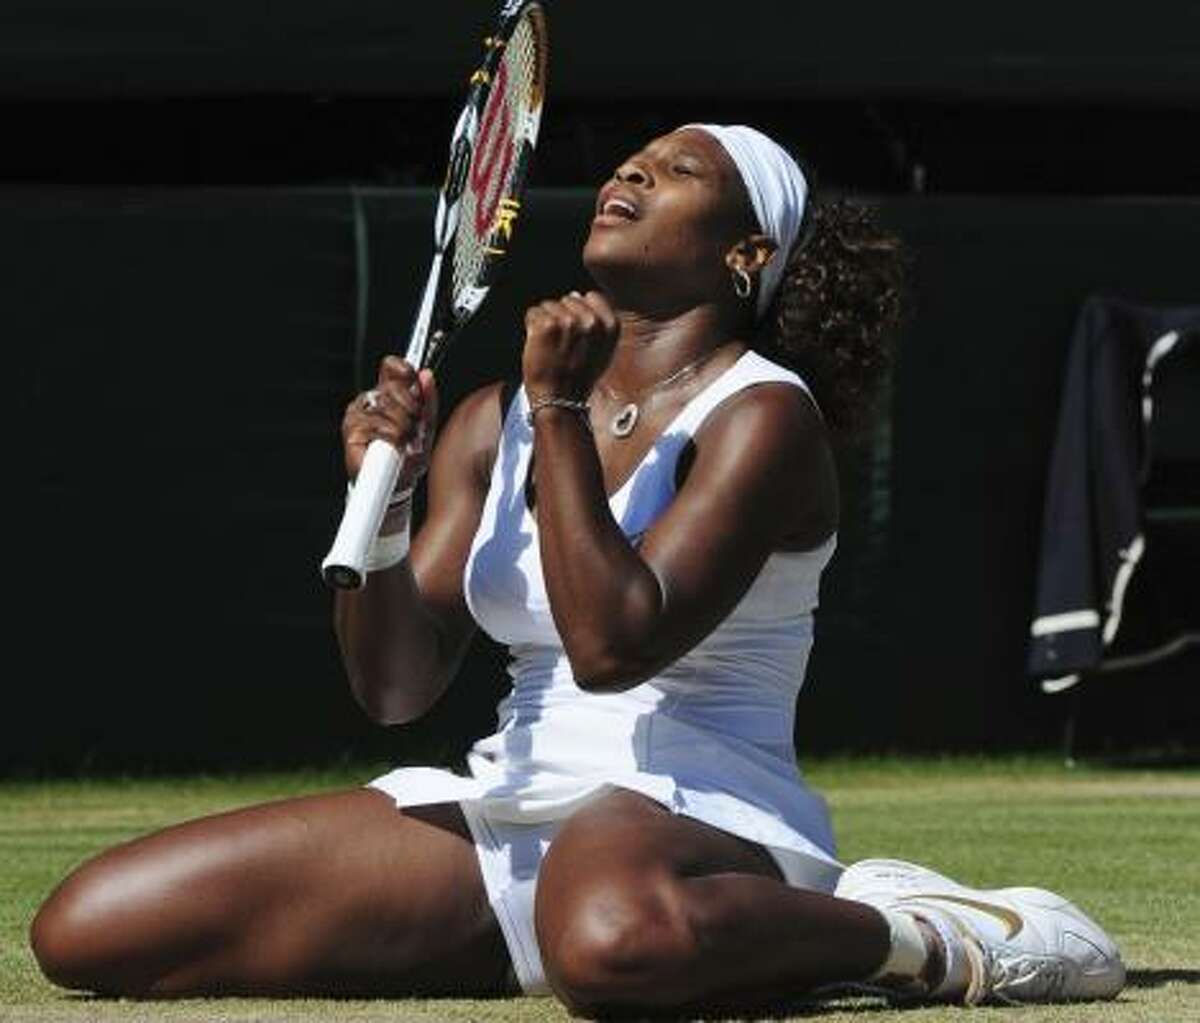 Serena Williams celebrates match point against sister Venus. Serena won 7-6 (3), 6-2 for her third Wimbledon title and 11th Grand Slam championship.